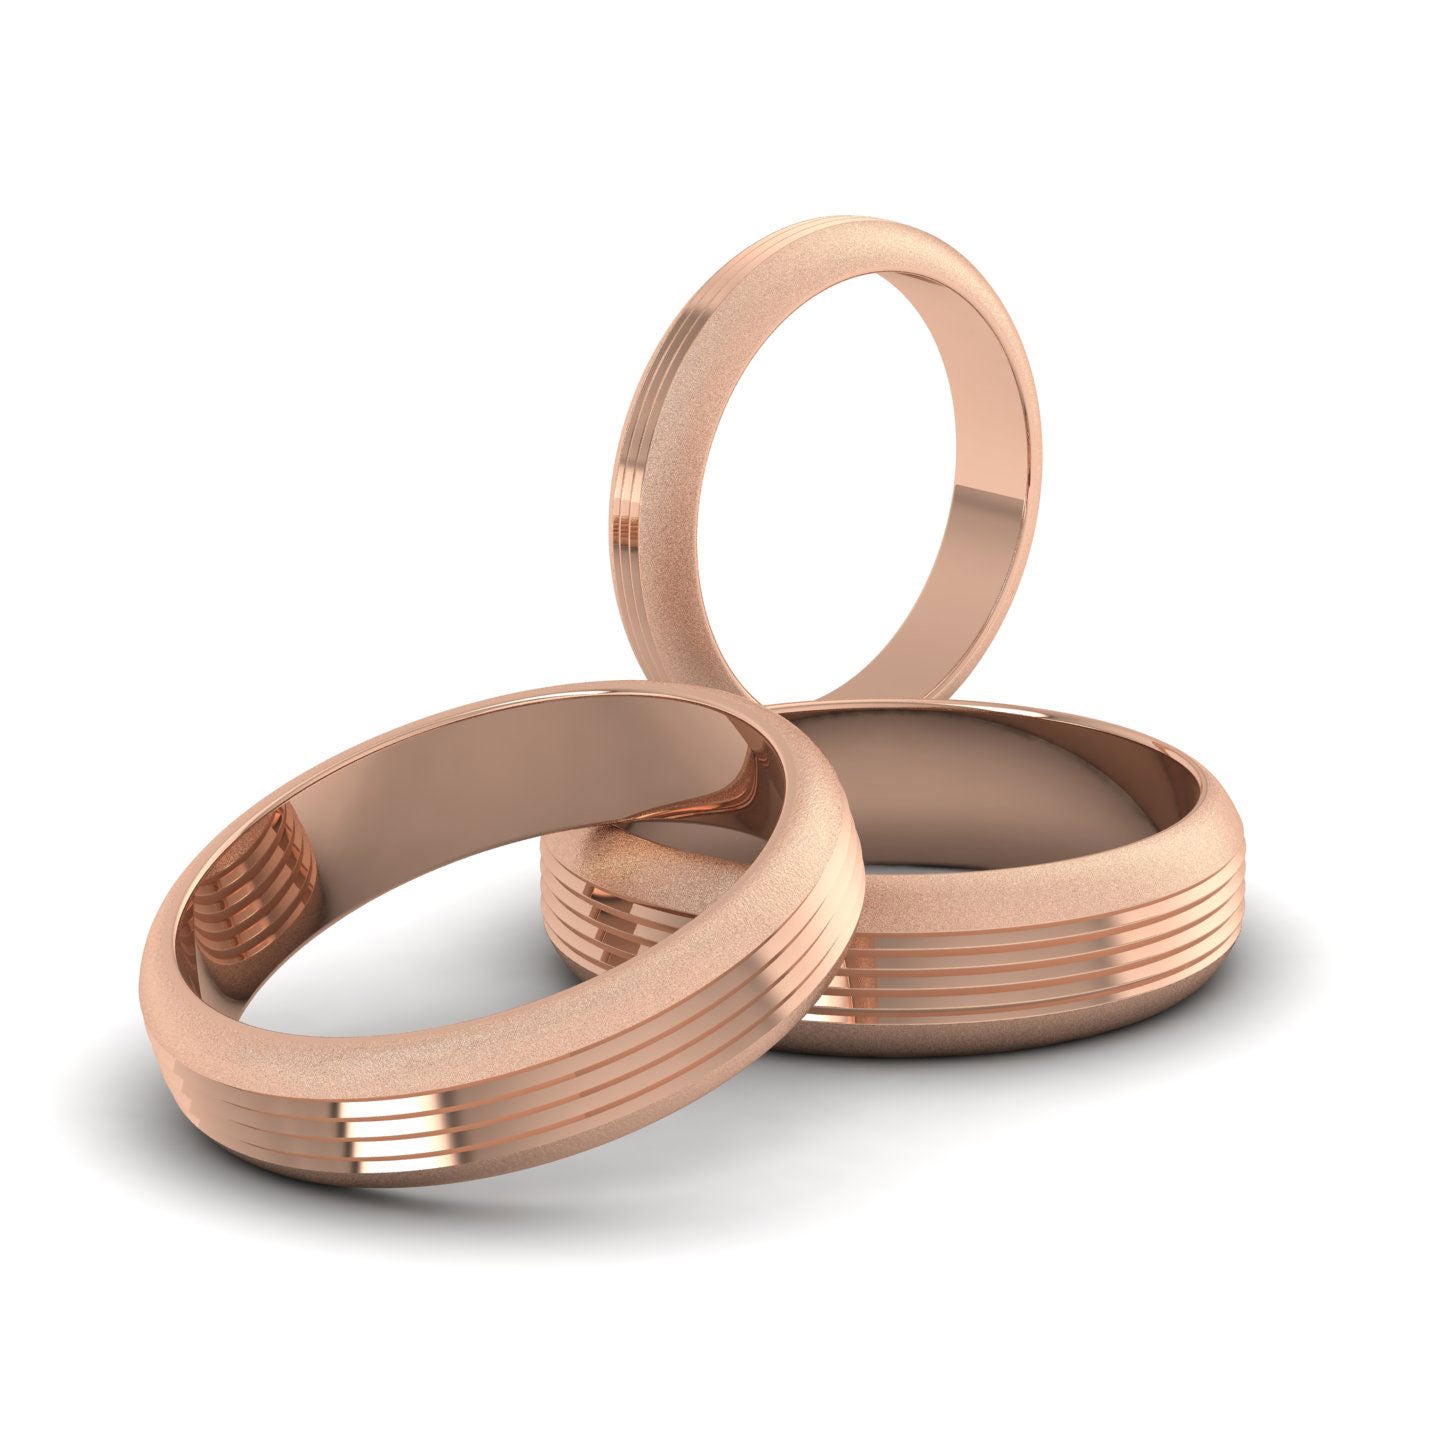 Grooved Pattern 9ct Rose Gold 4mm Wedding Ring